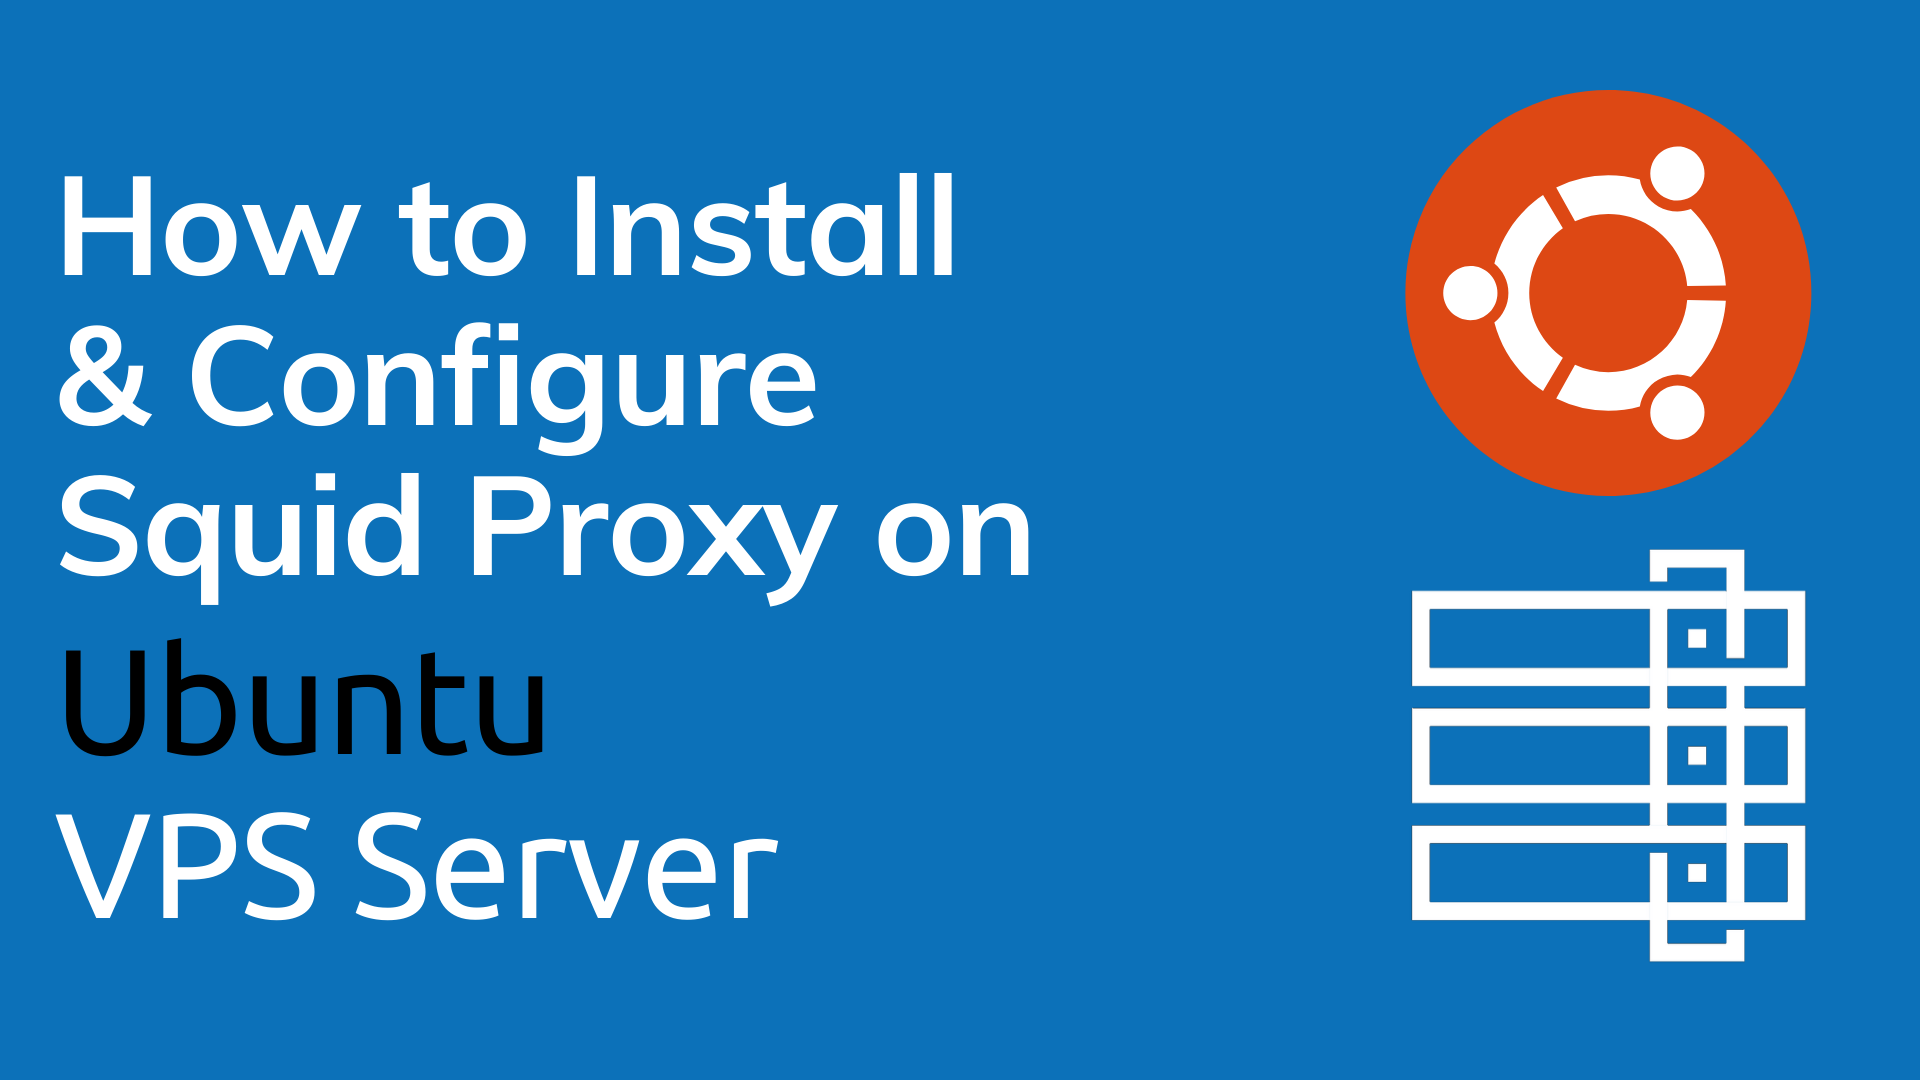 How to install and configure squid proxy server on ubuntu vps